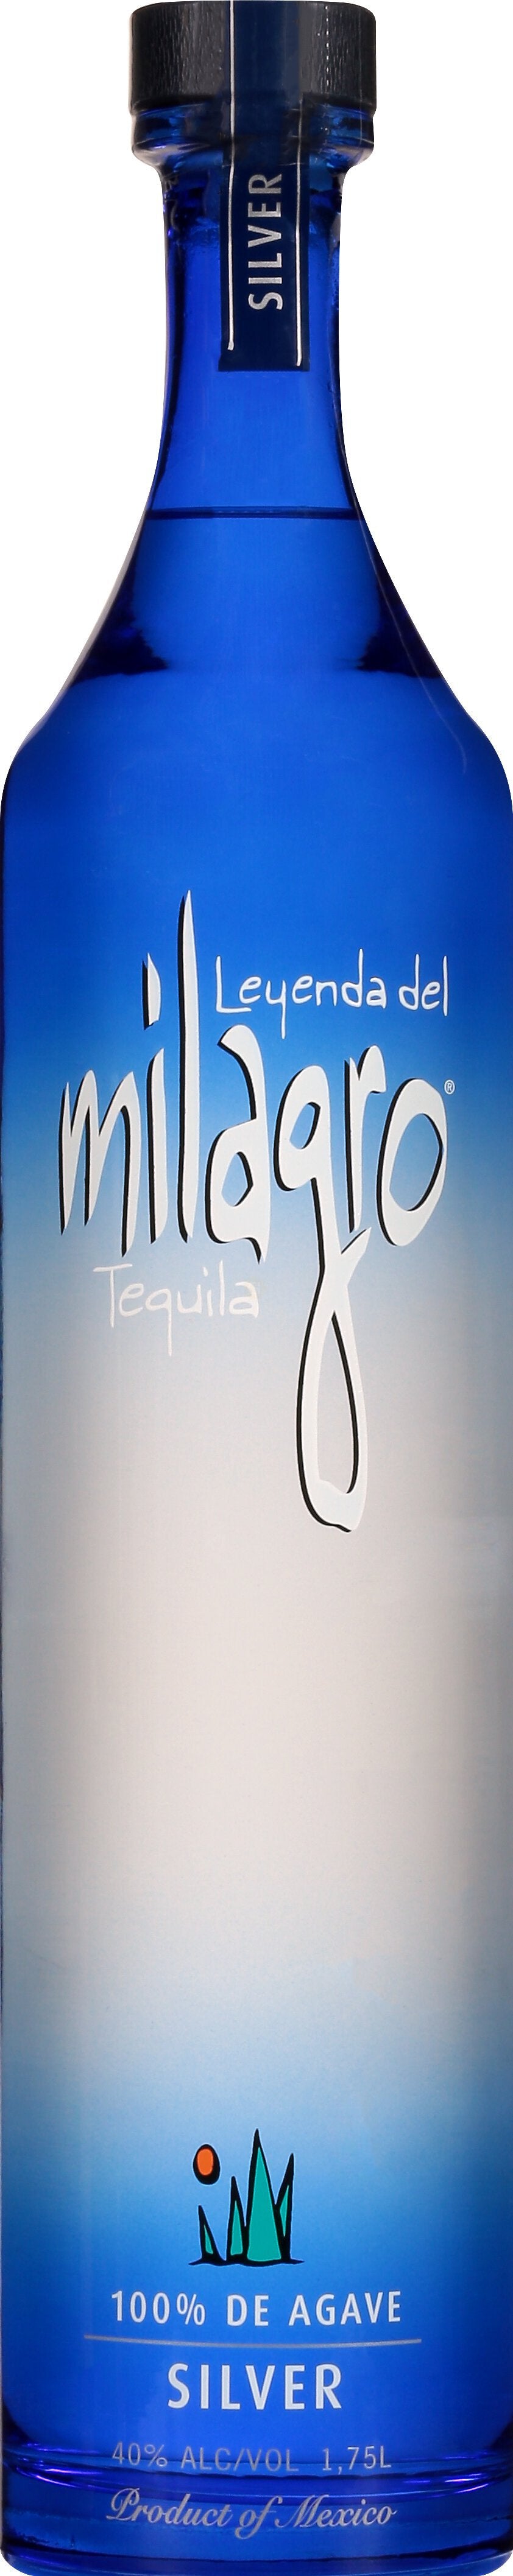 Milagro Silver Tequila 375ml